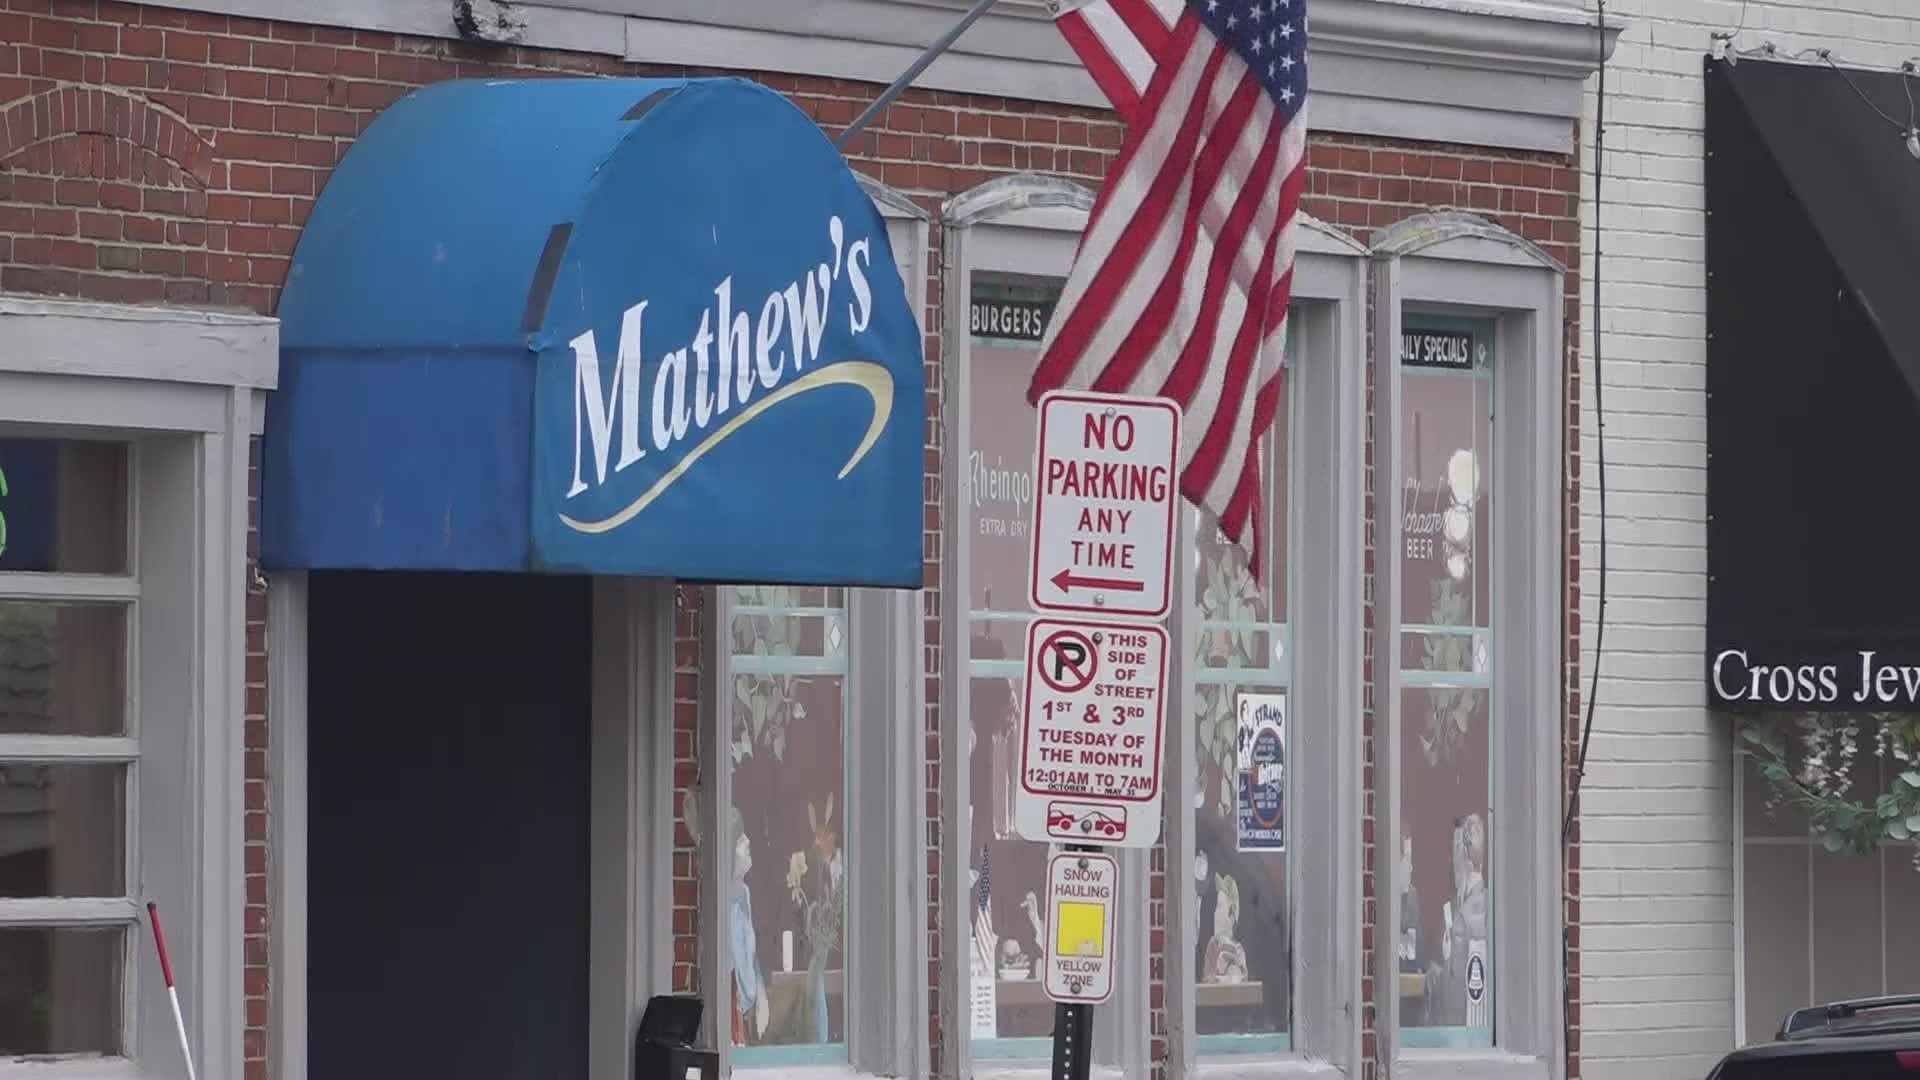 Pat Hogan told NEWS CENTER Maine he worked at Mathew's Pub in Portland for about six weeks. During that time, he said members of the 'Proud Boys' held meetings